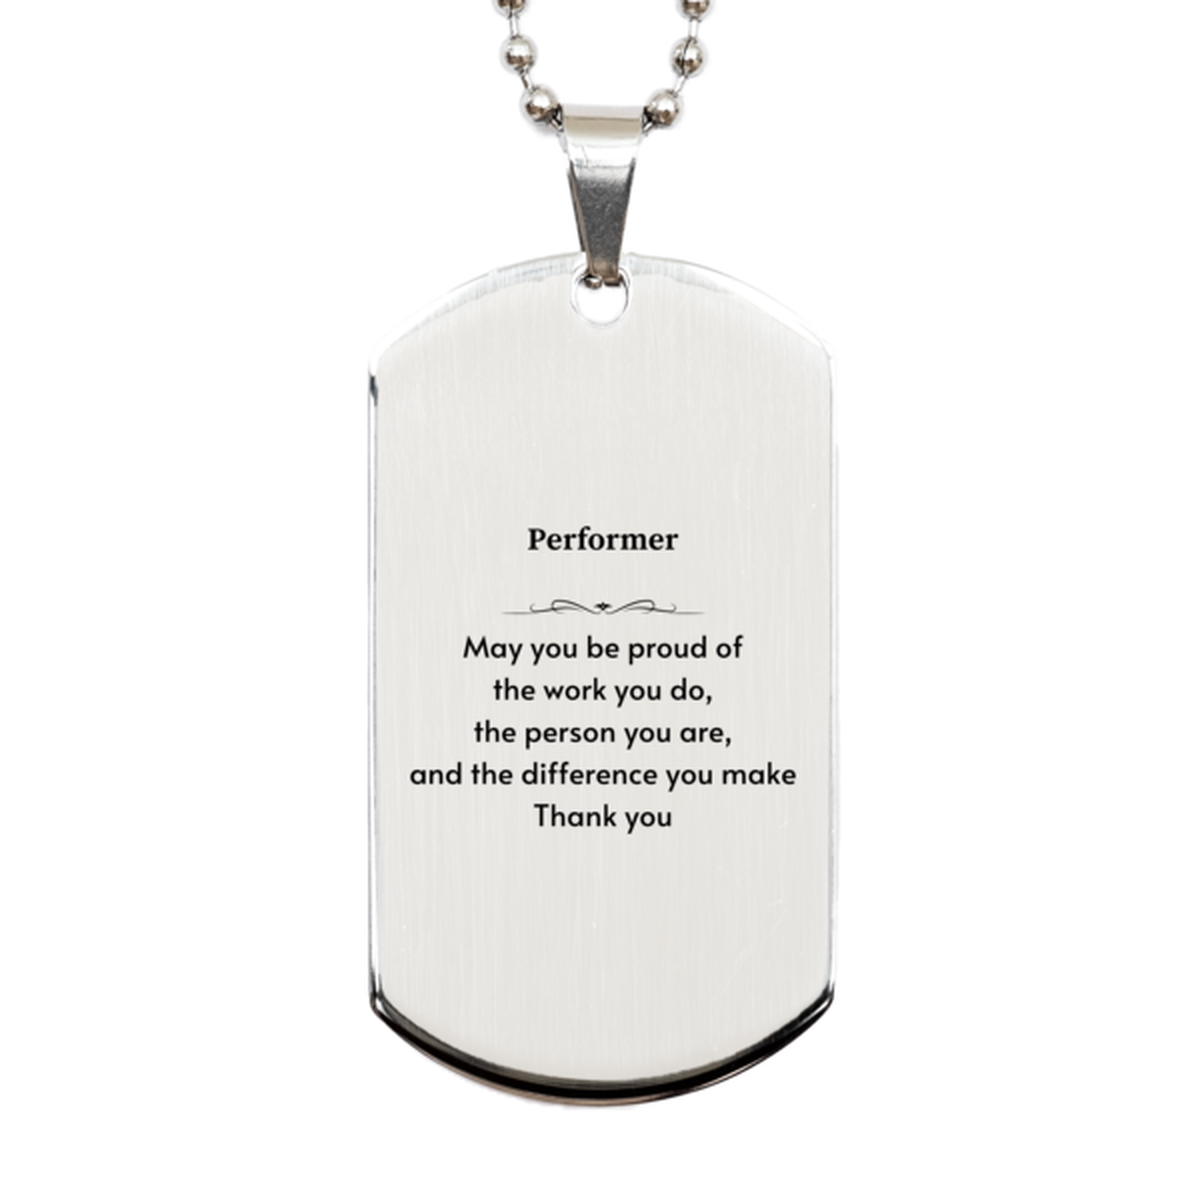 Heartwarming Silver Dog Tag Retirement Coworkers Gifts for Performer, Performer May You be proud of the work you do, the person you are Gifts for Boss Men Women Friends